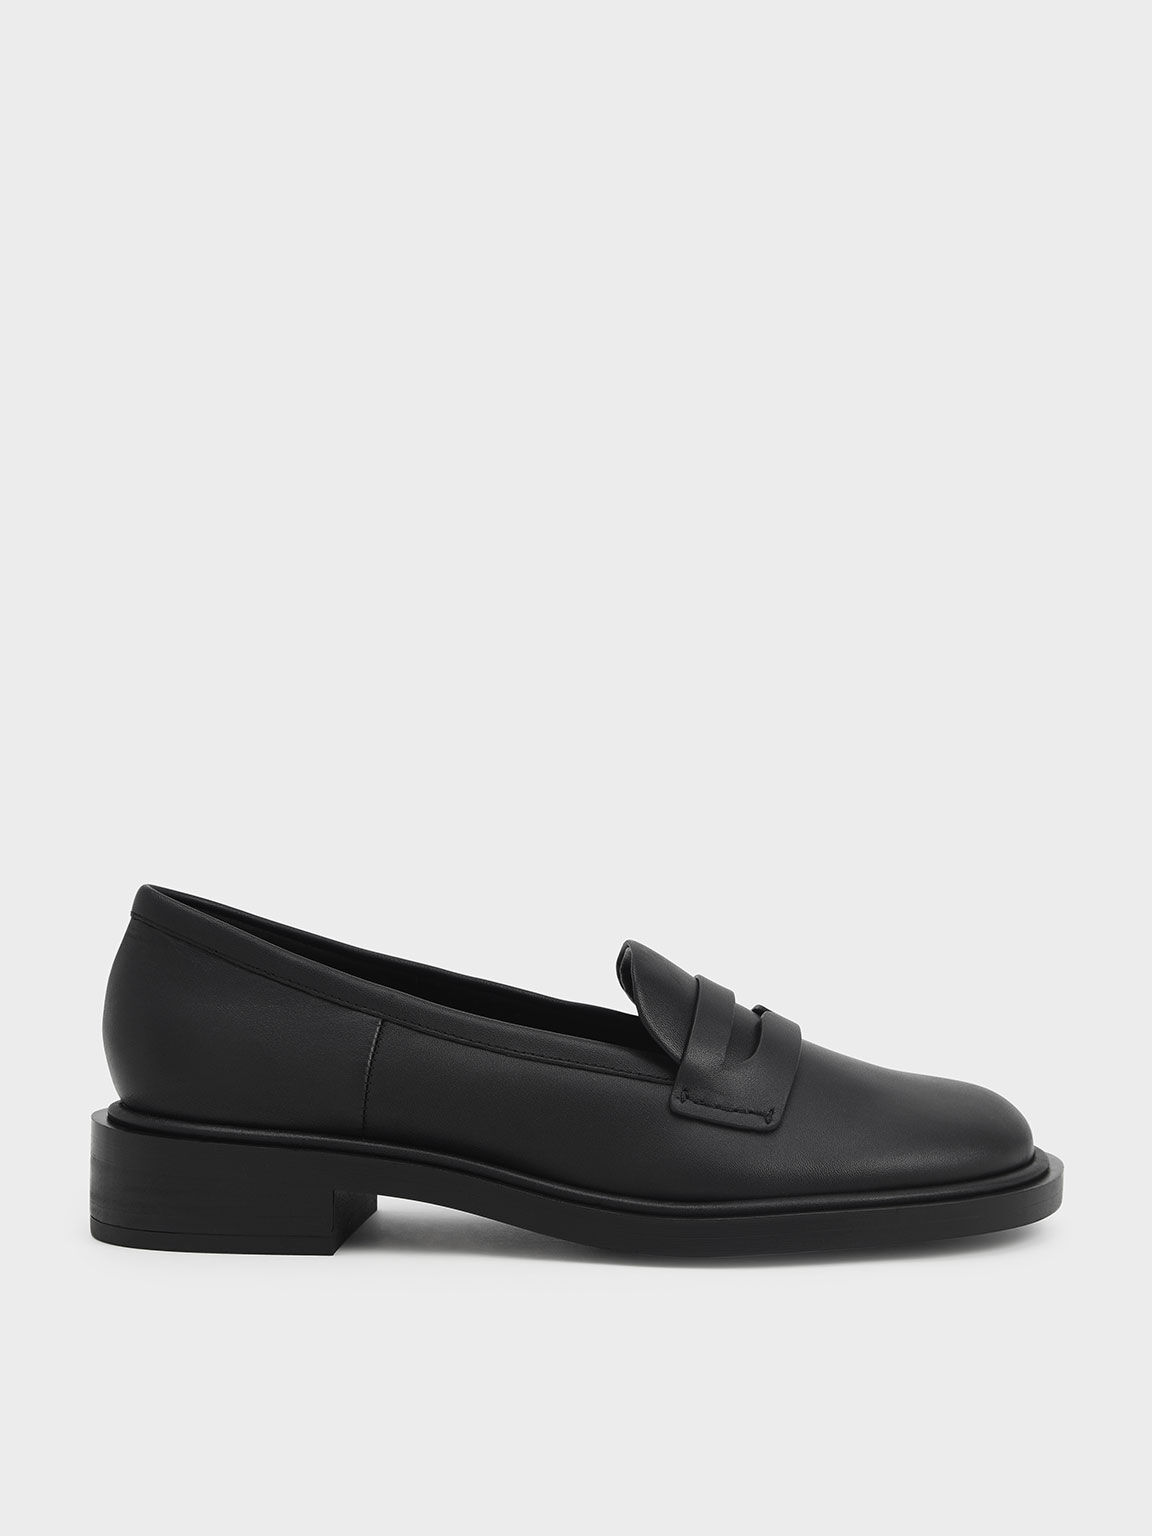 Rumi Leather Penny Loafers, Black, hi-res